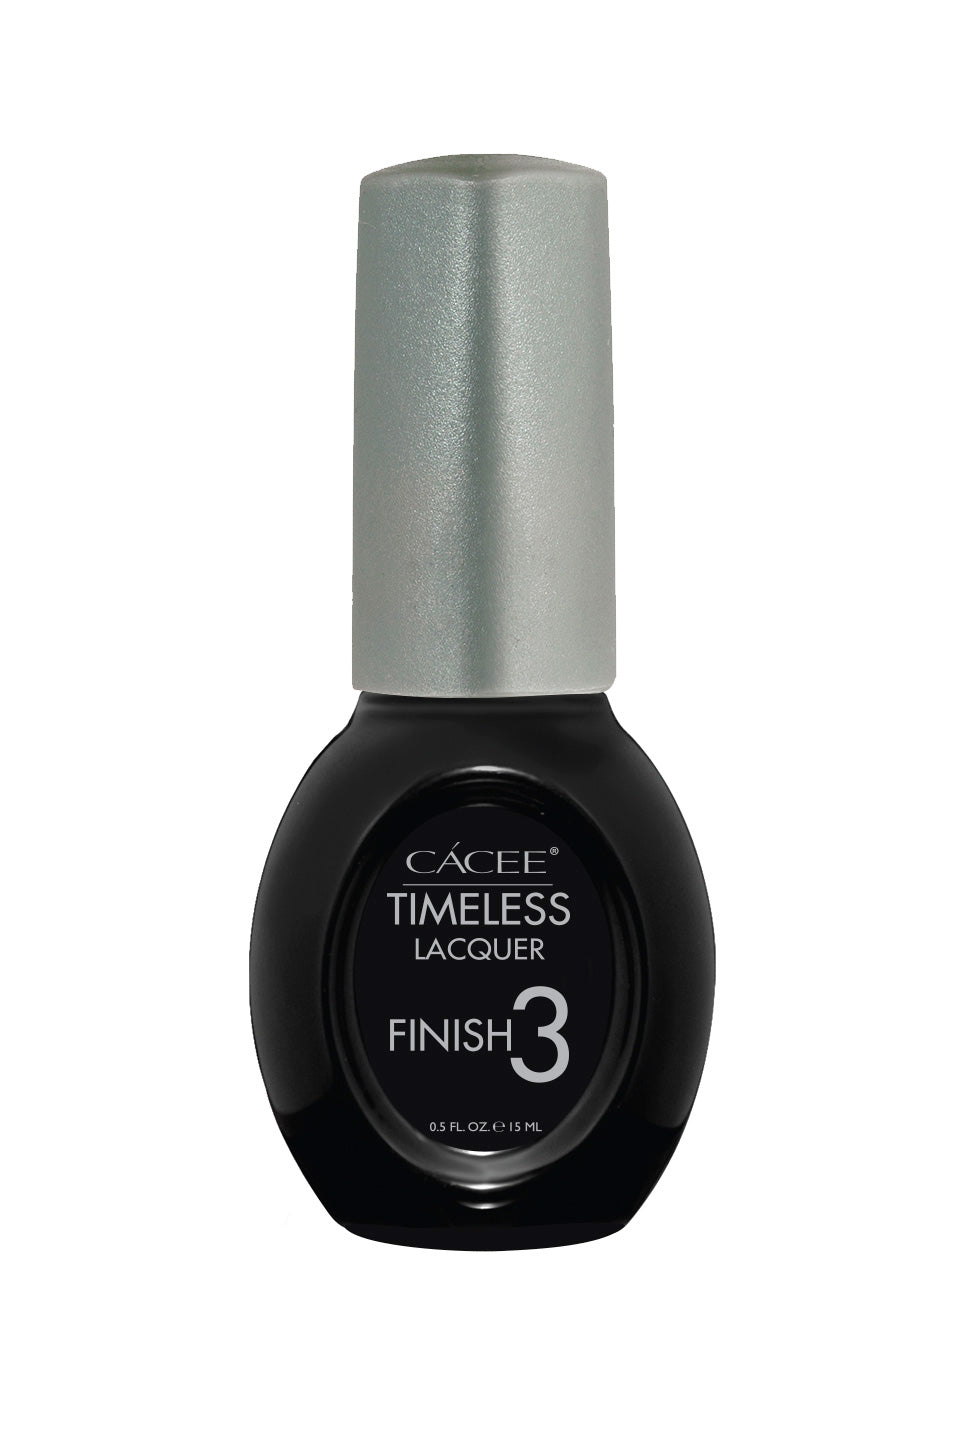 Cacee - Timeless Lacquer - Base & Top Coat Duo Set (15ml each)